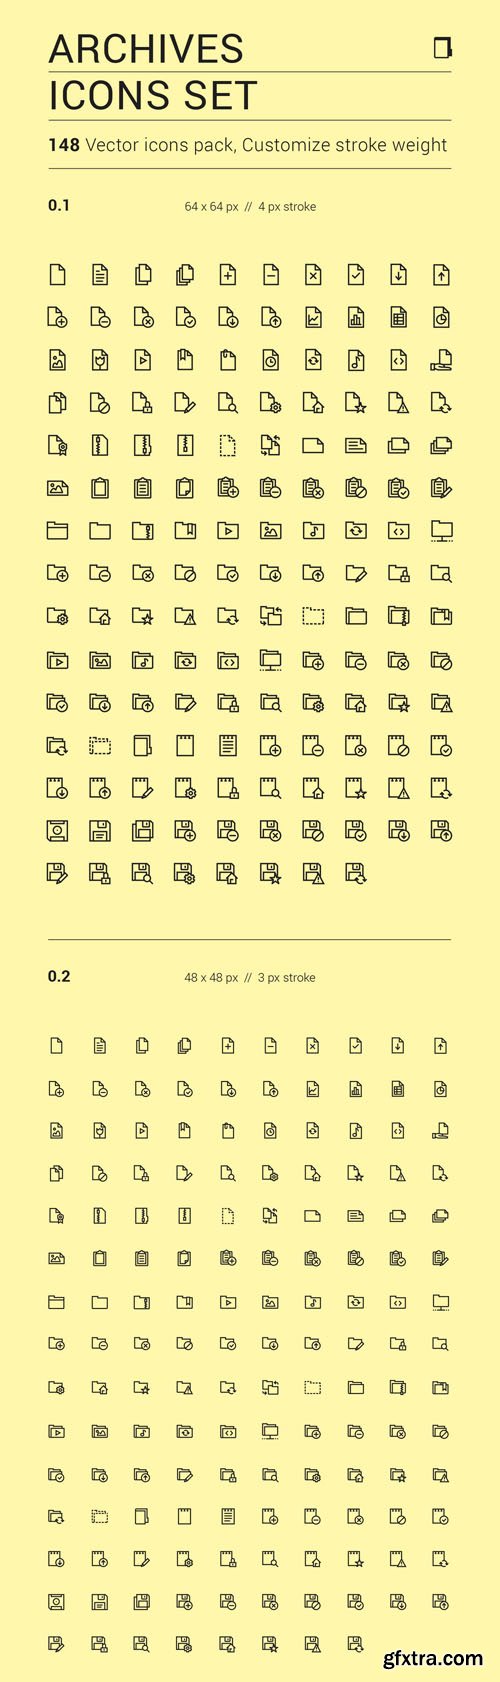 The Icons Set - Archives